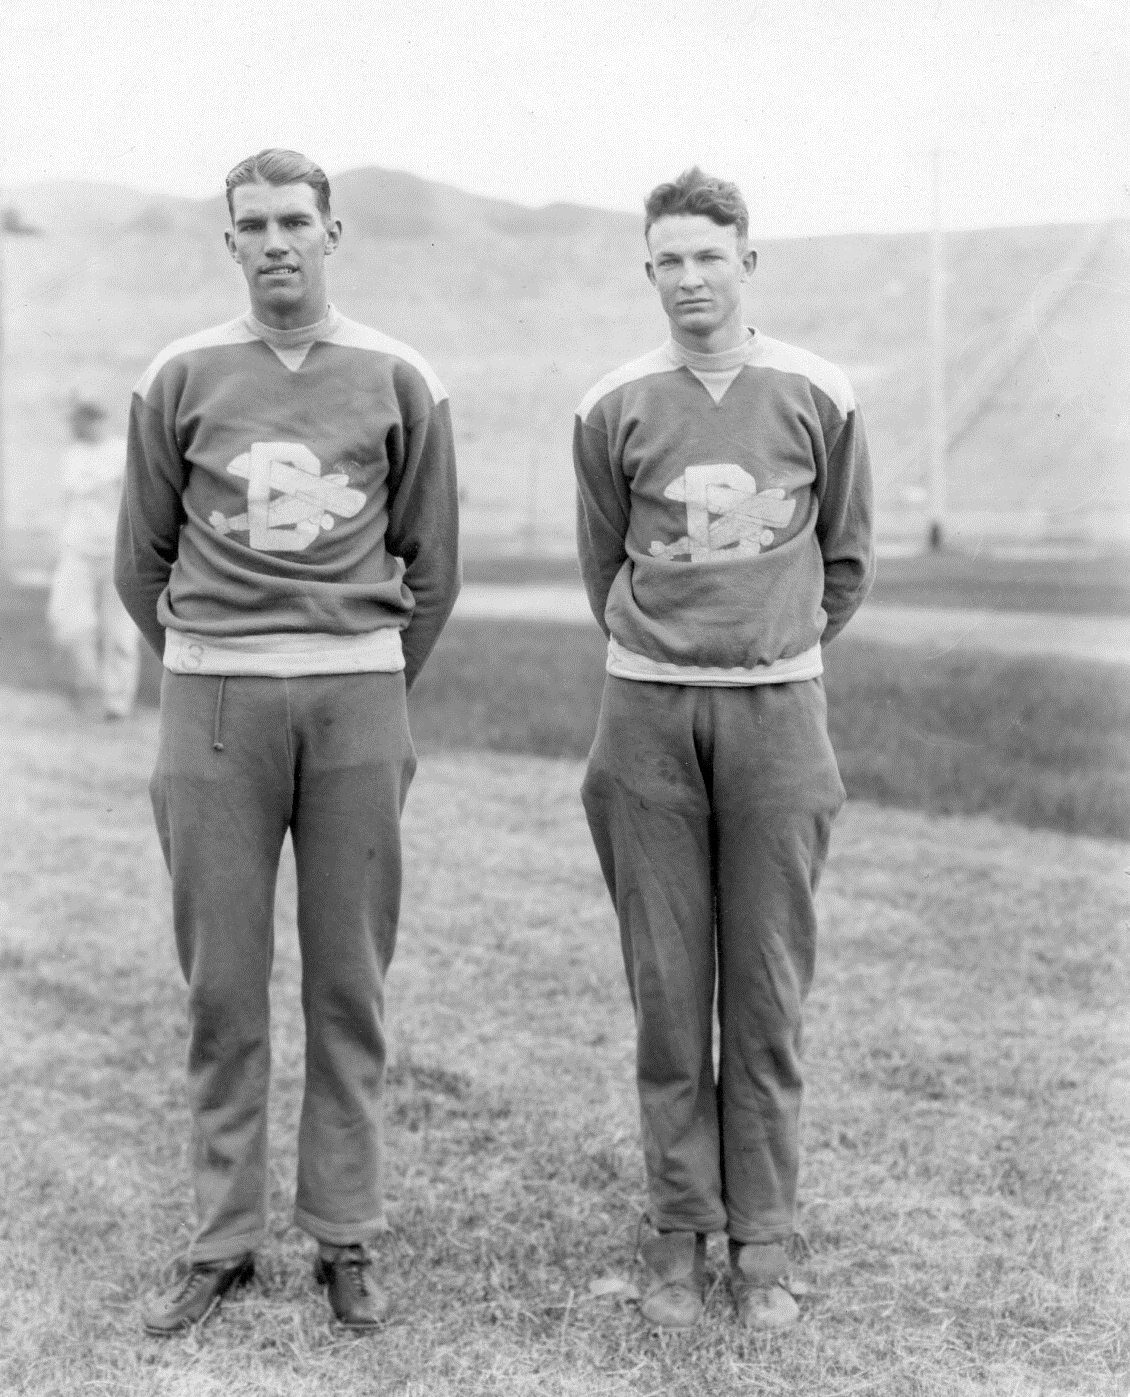 WCHS-01108 Dixie track stars, E. Romney and V. Loraine 'Coxie' Cox